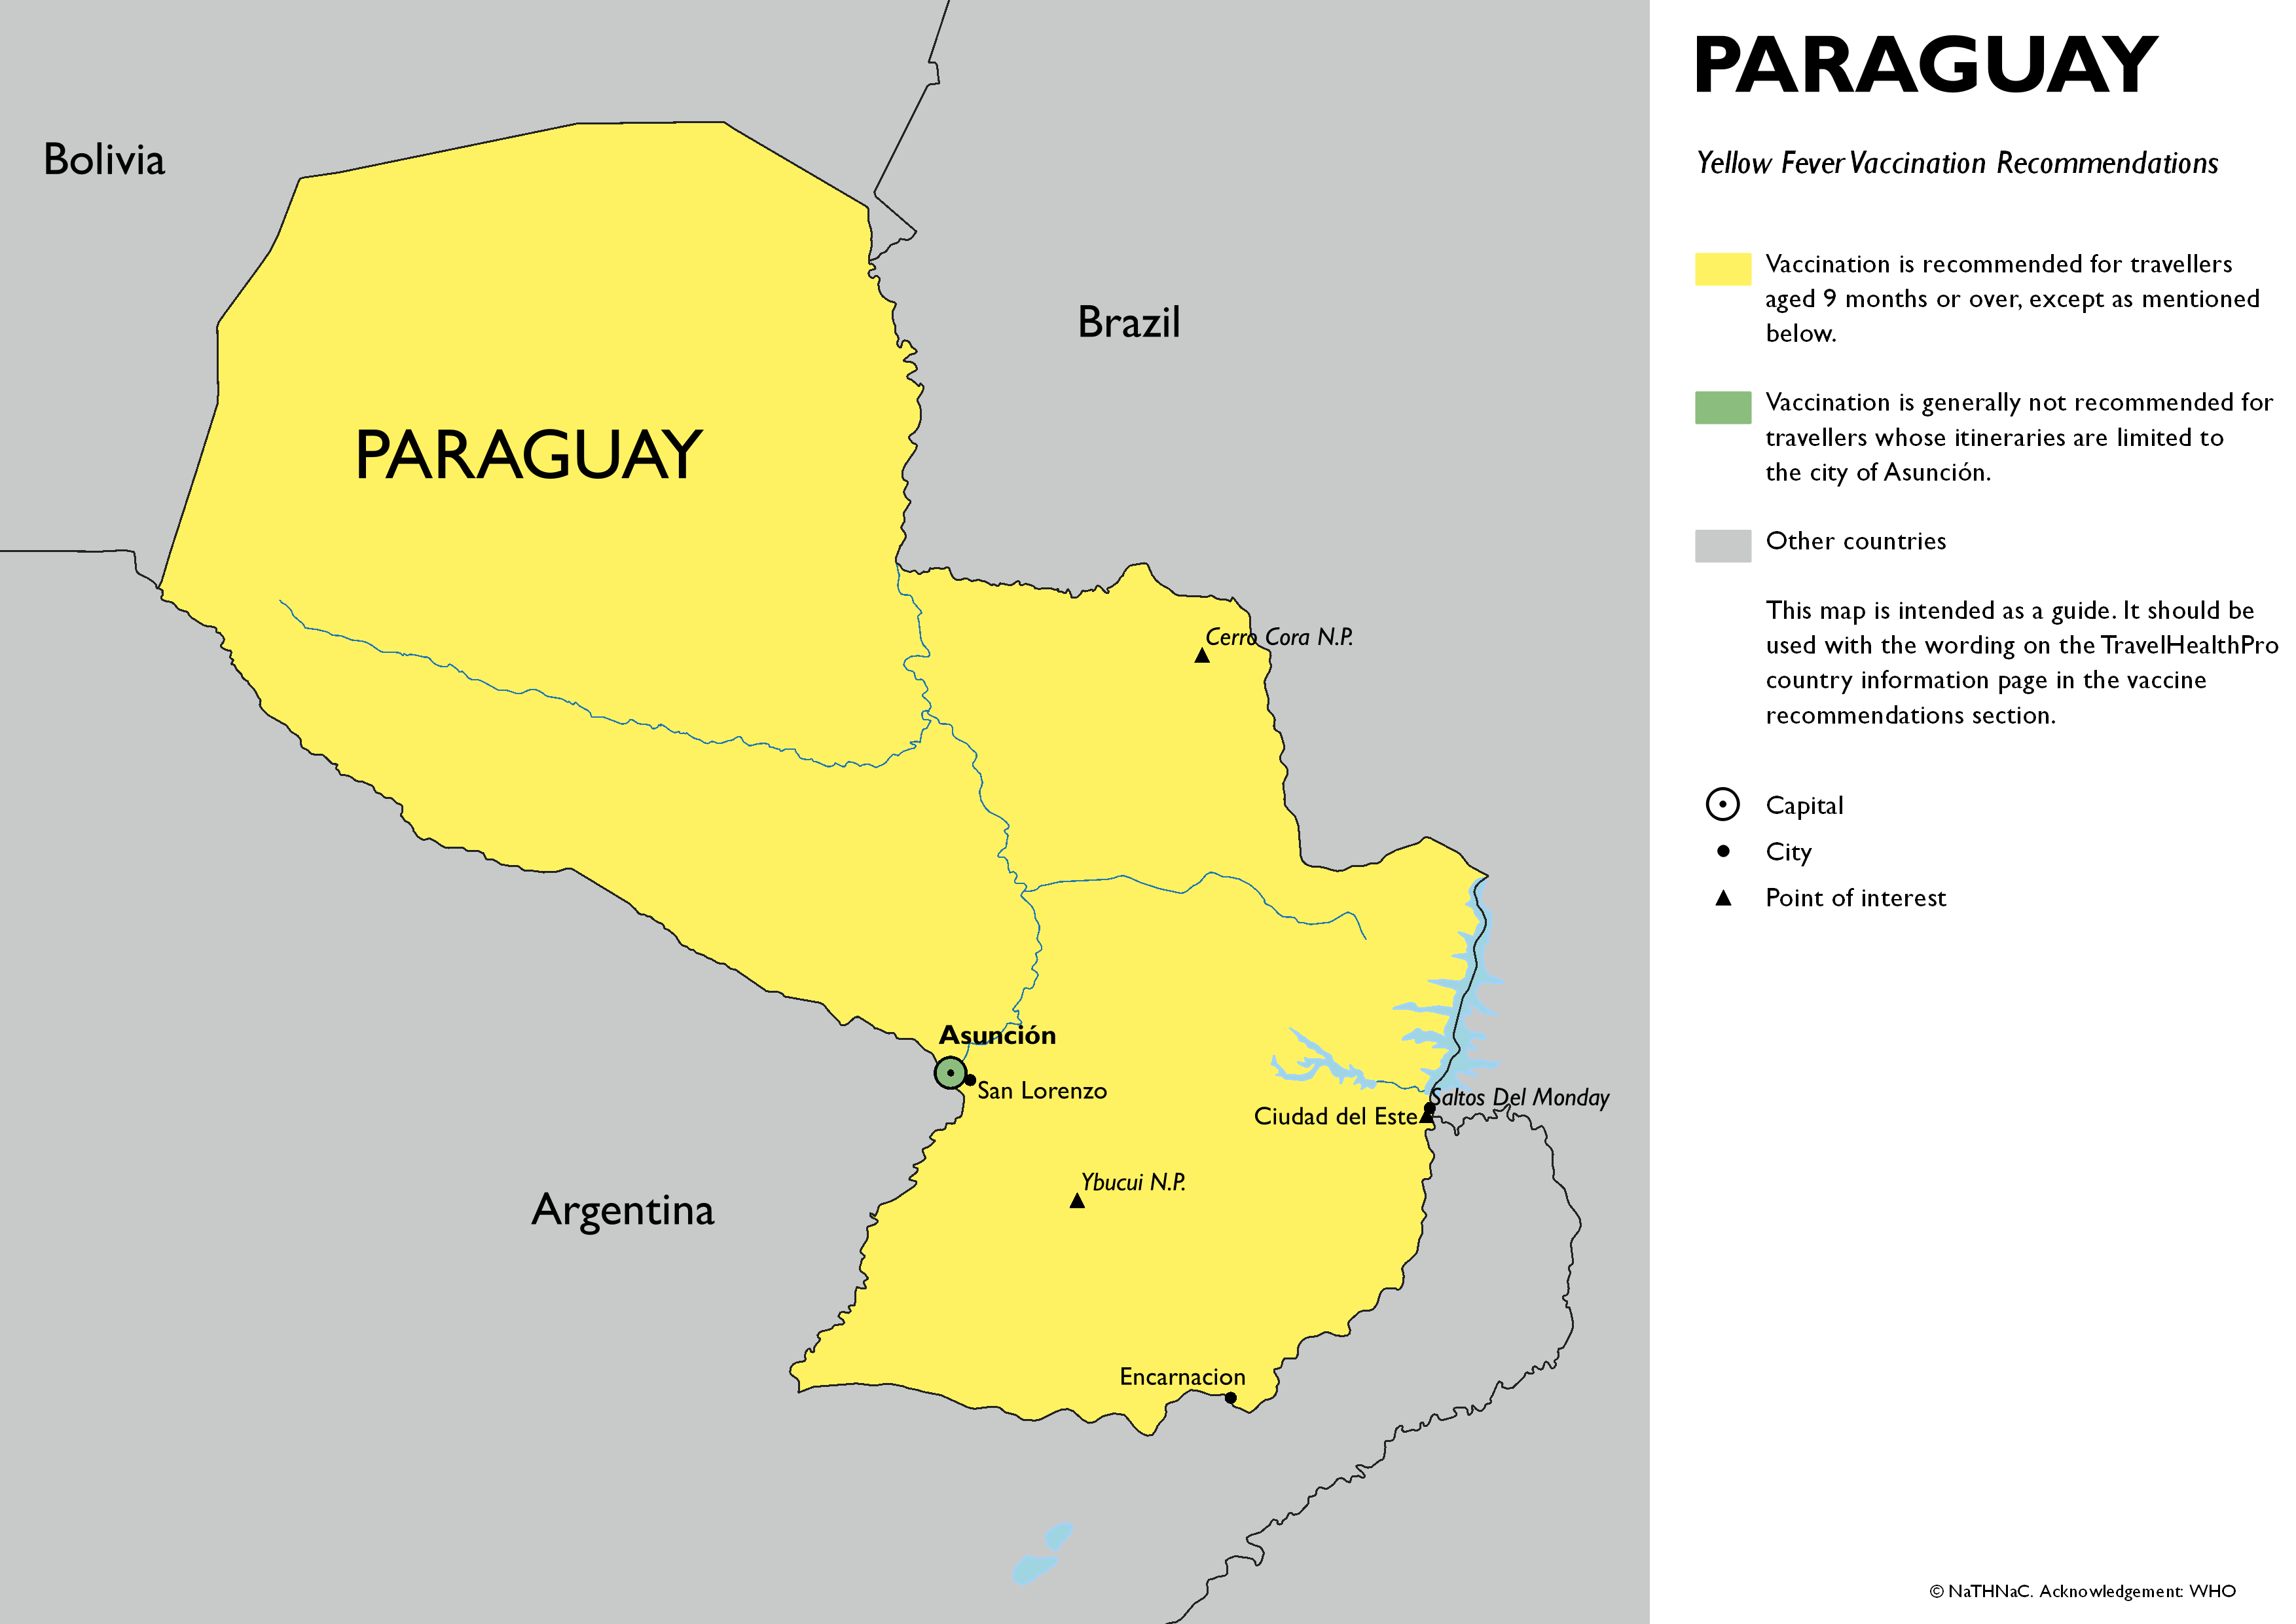 Yellow fever vaccine recommendation map for Paraguay